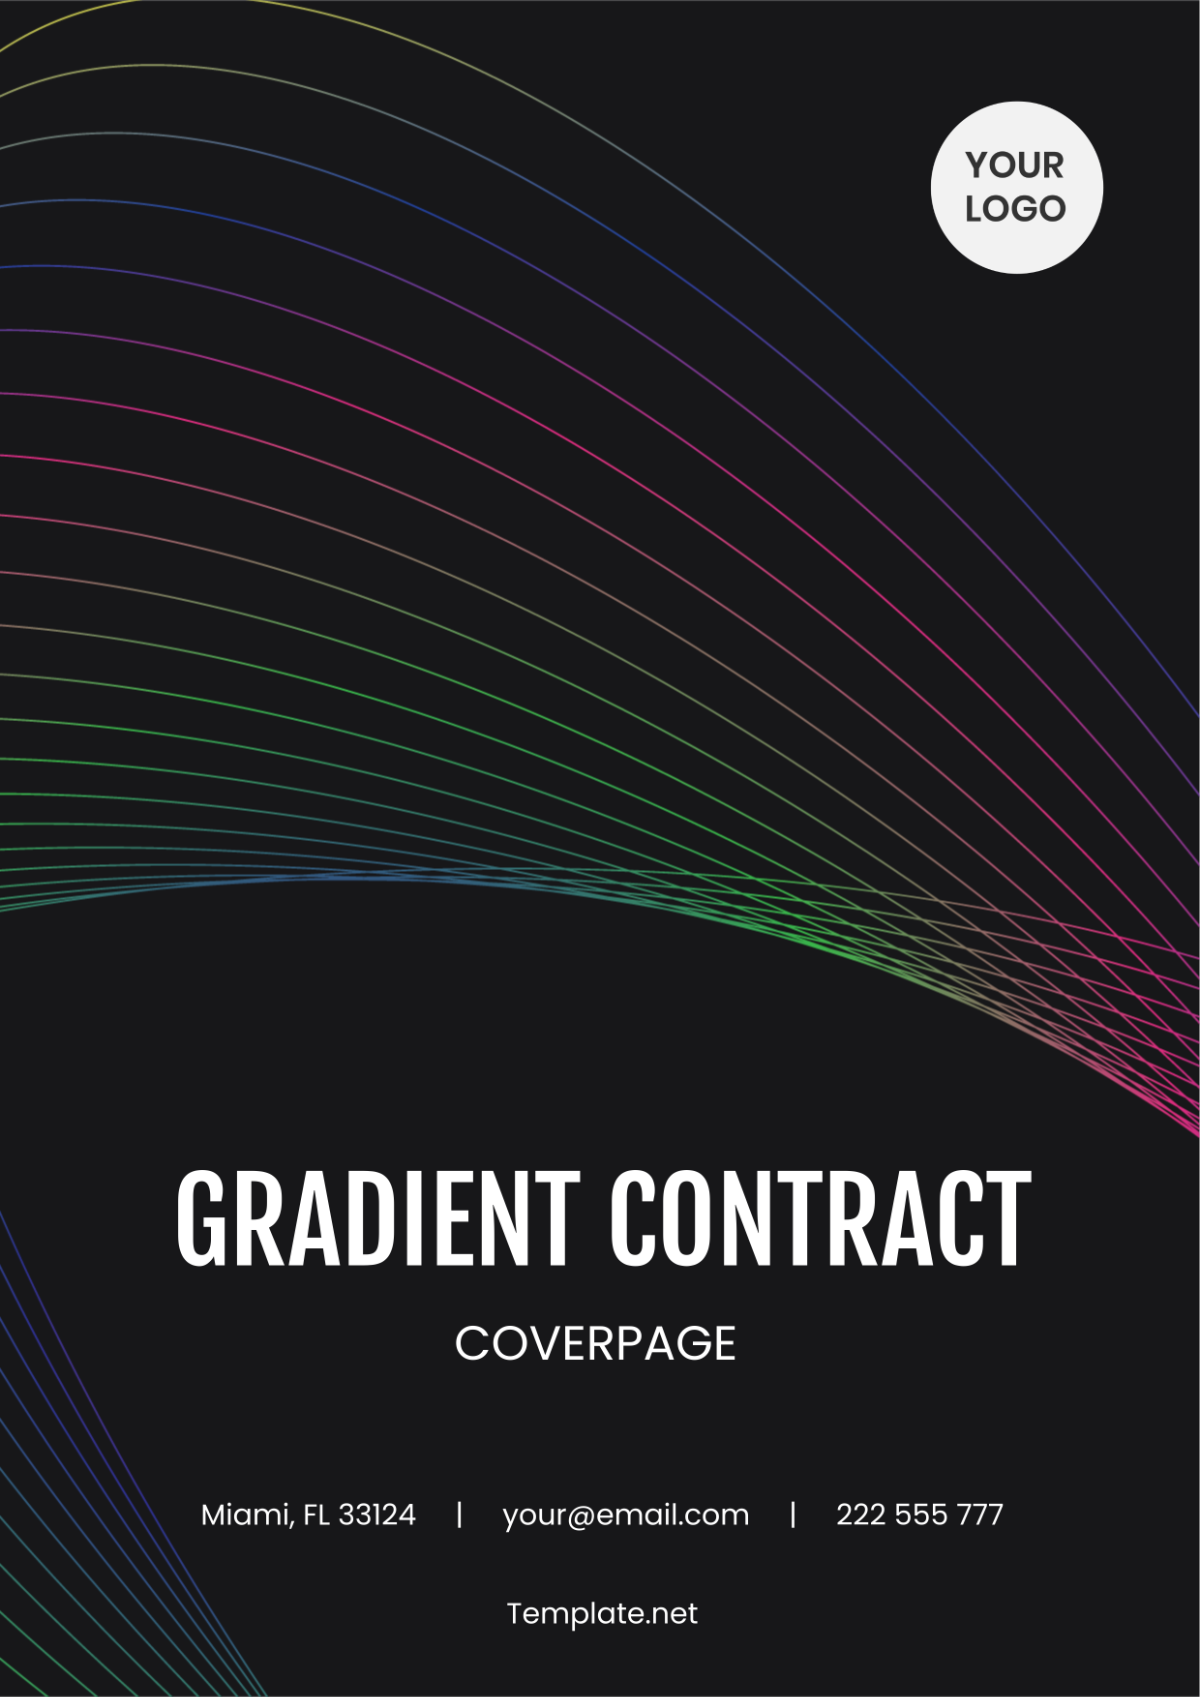 Gradient Contract Cover Page Template